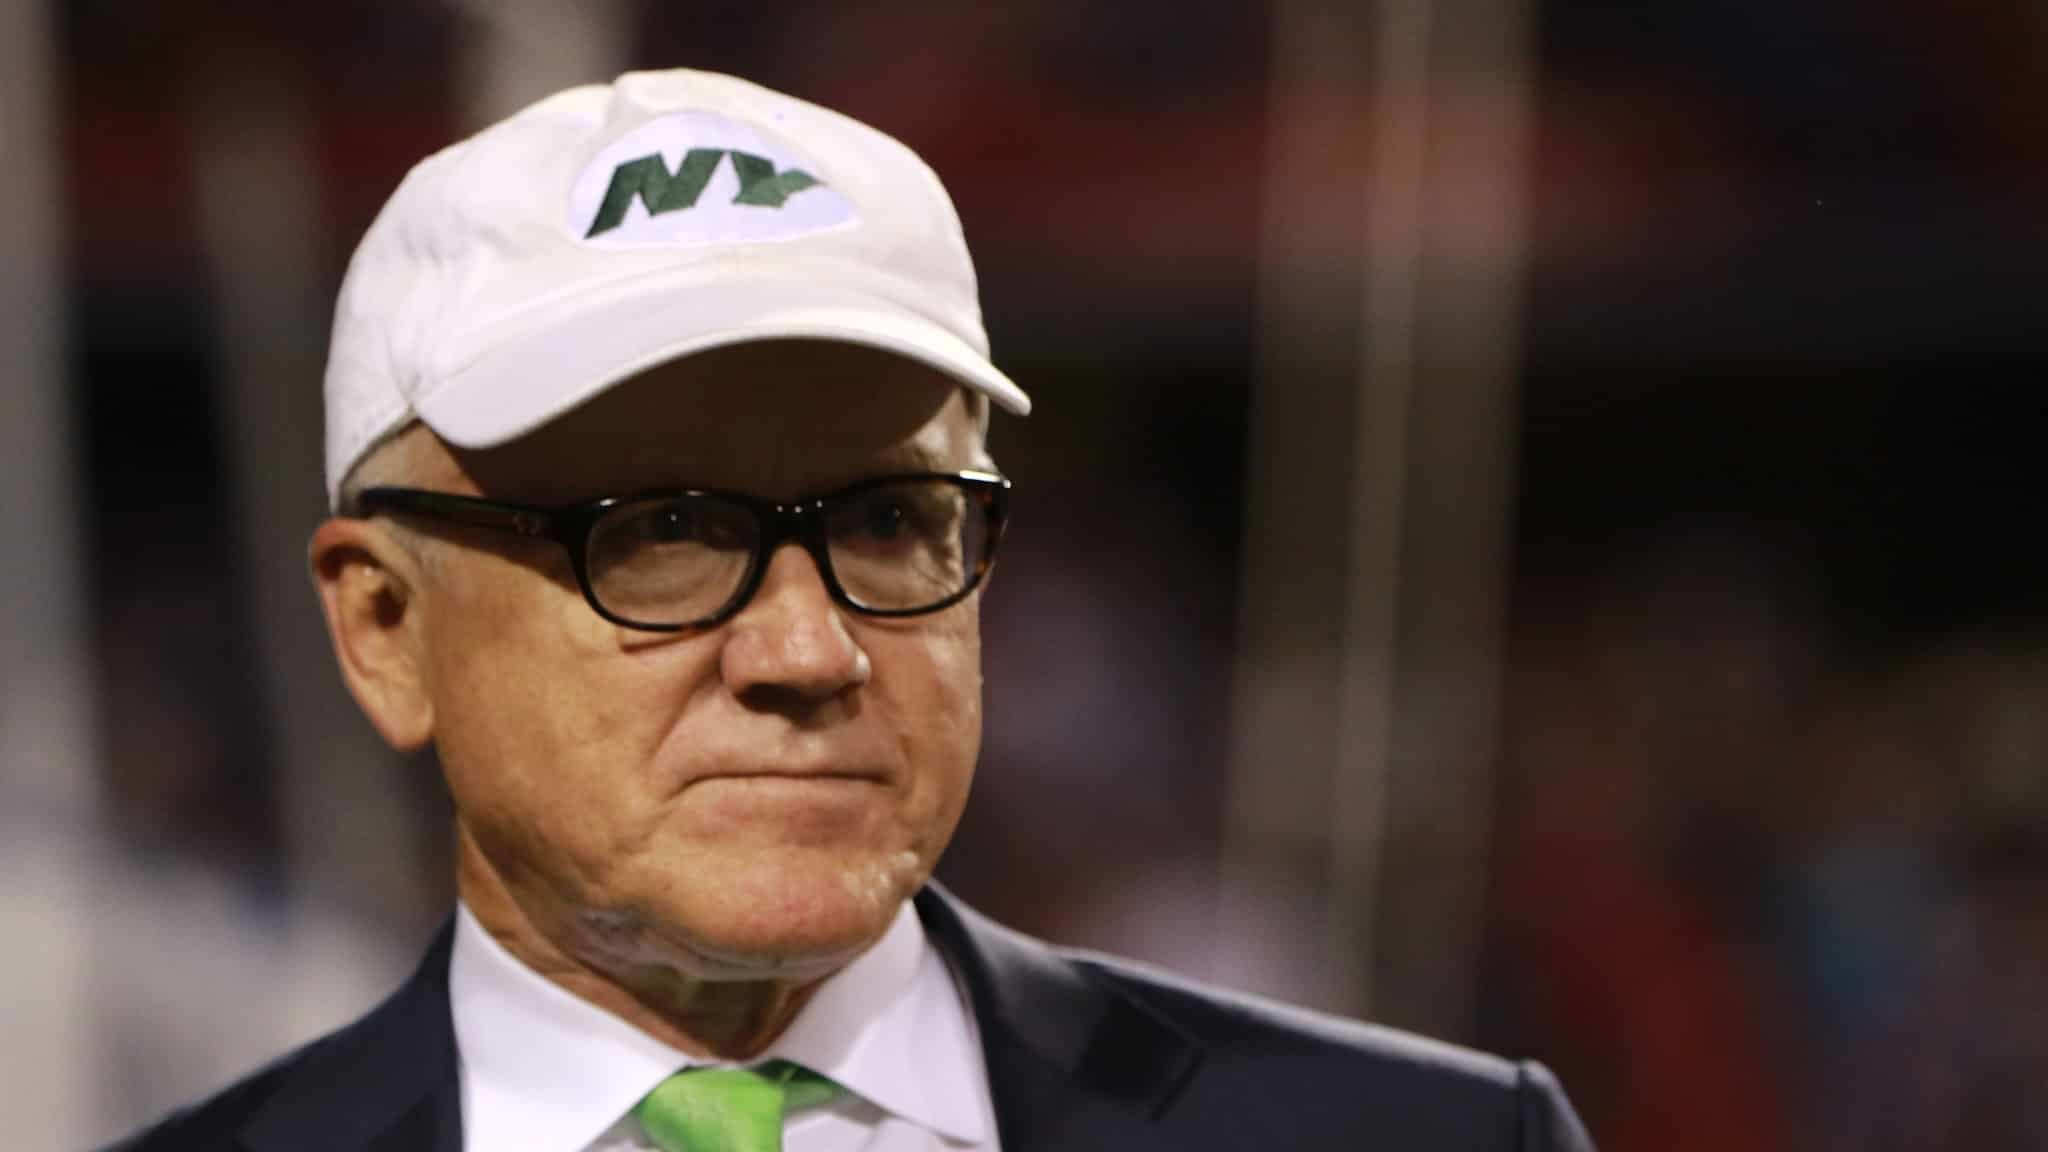 ORCHARD PARK, NY - SEPTEMBER 15: New York Jets owner Woody Johnson talks on the sidelines before the game against the Buffalo Bills at New Era Field on September 15, 2016 in Orchard Park, New York.